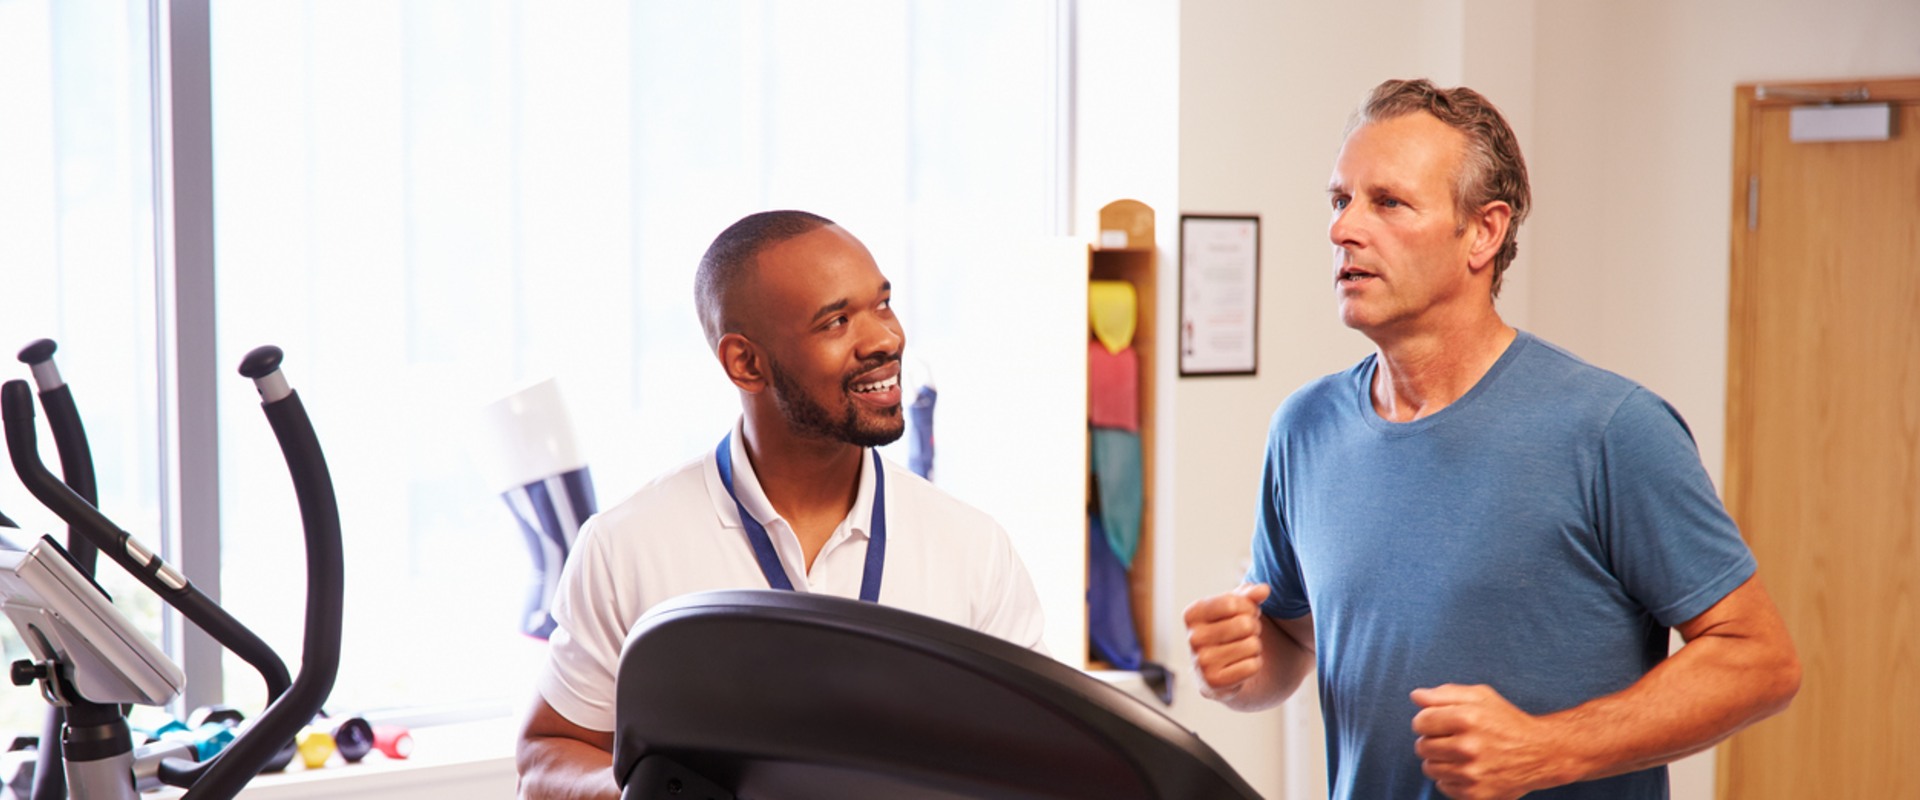 Is Physical Therapy Working? How to Know for Sure